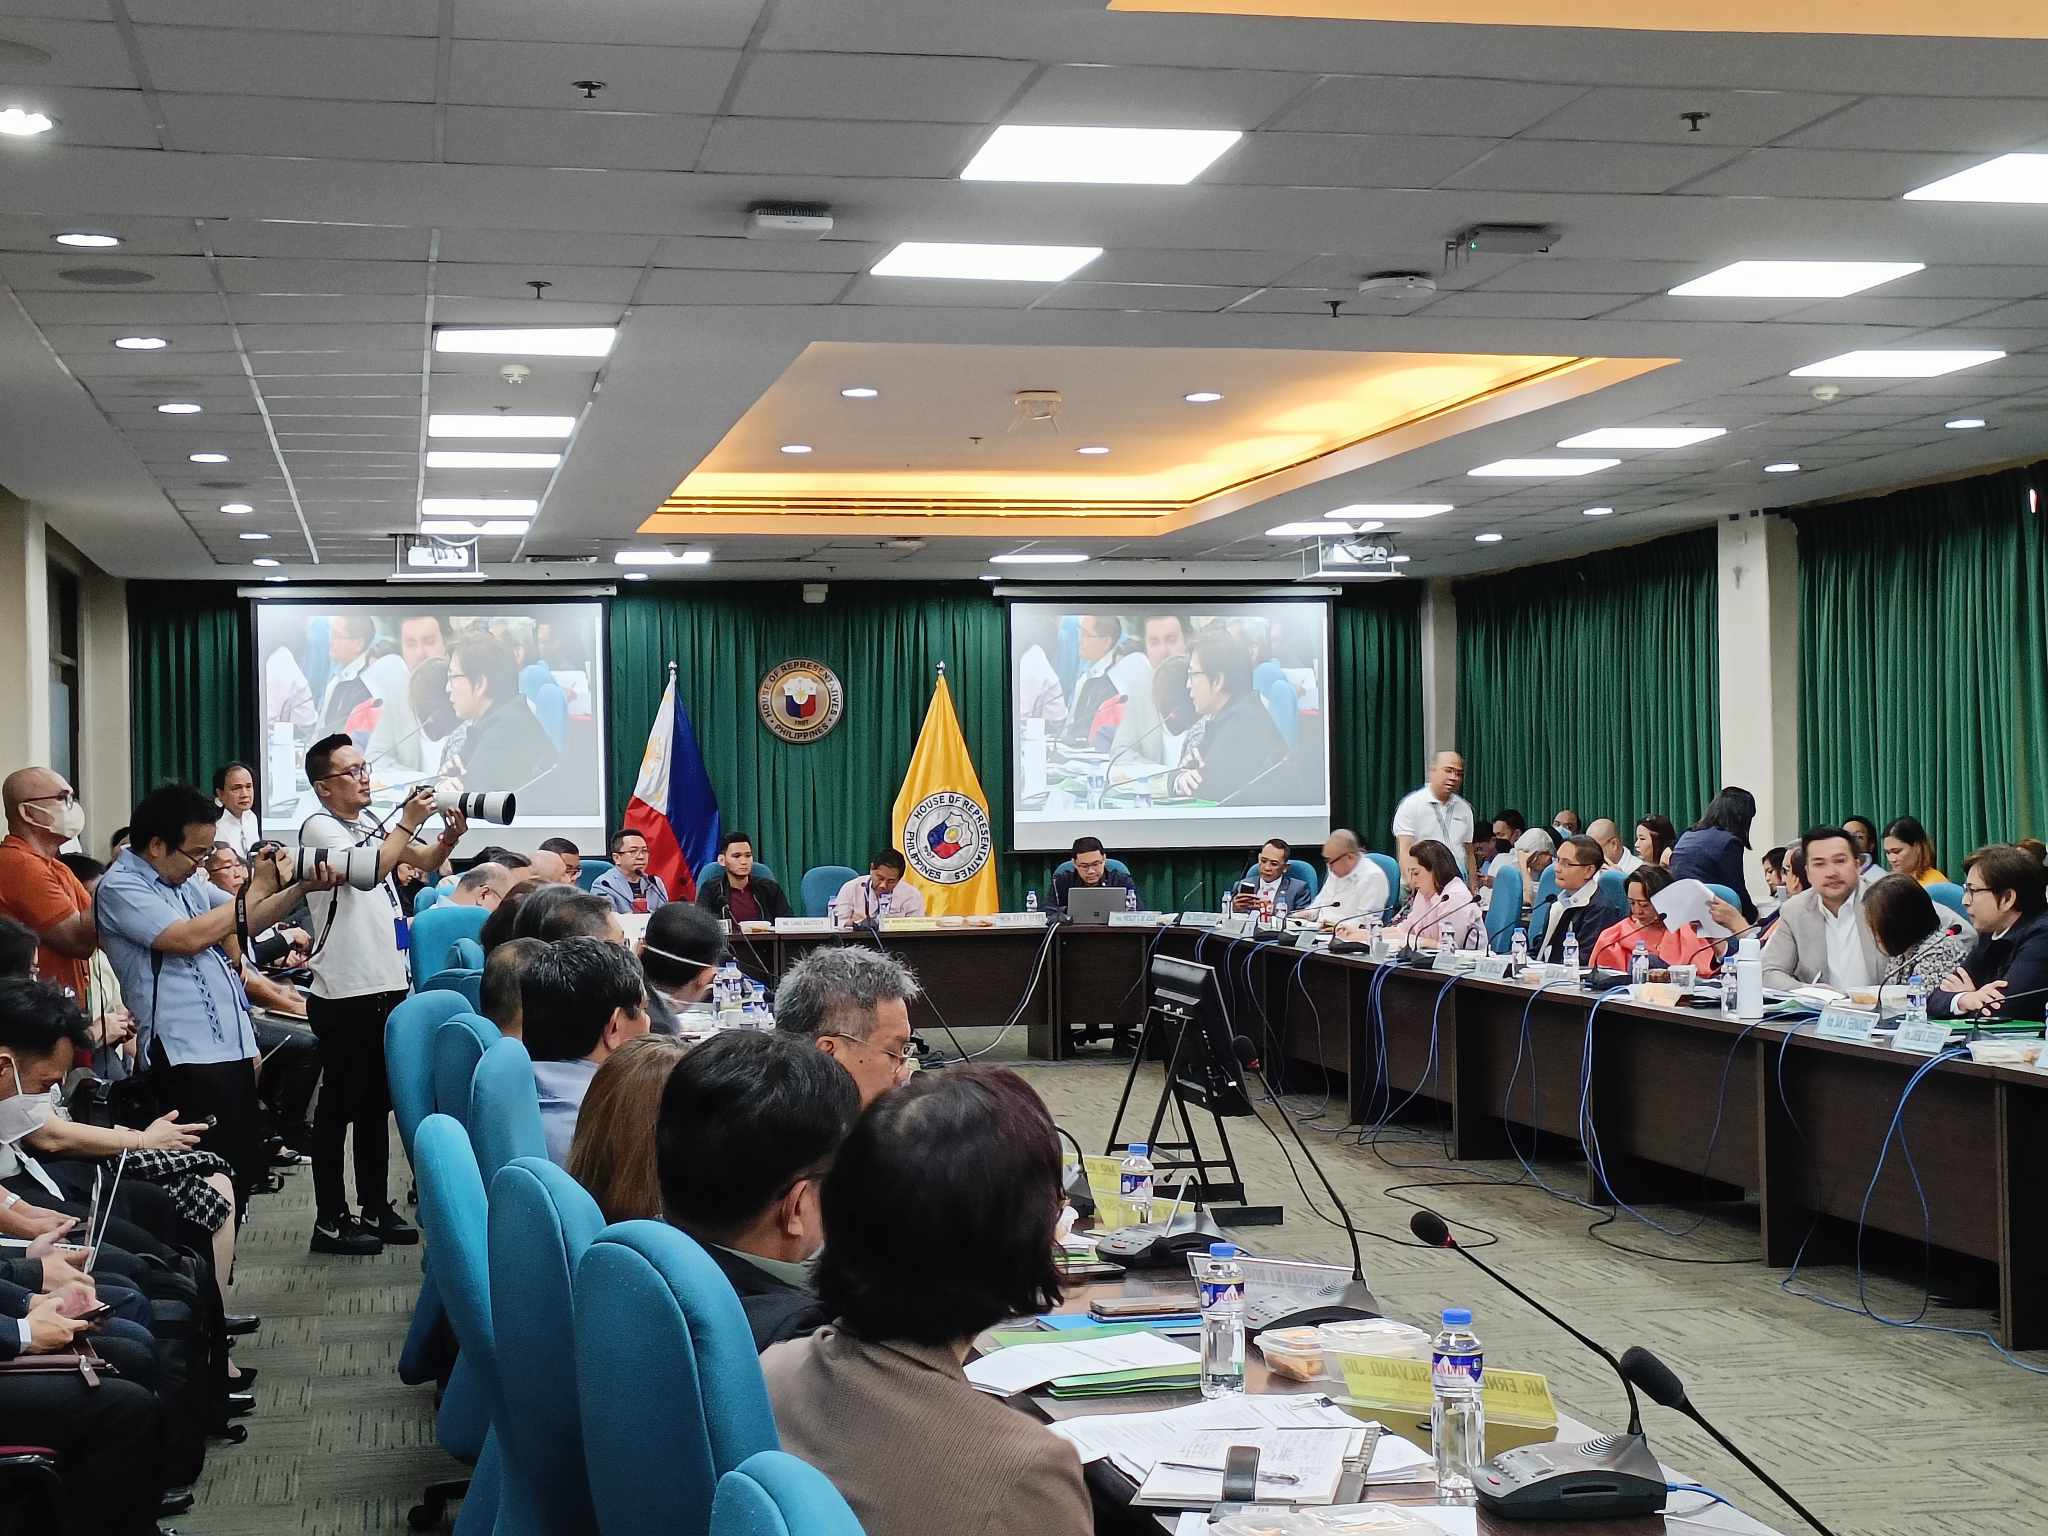 CAPELCO PARTICIPATED IN THE HOUSE ENERGY COMMITTEE HEARING ON WIDEPREAD POWER INTERRUPTIONS IN WESTERN VISAYAS